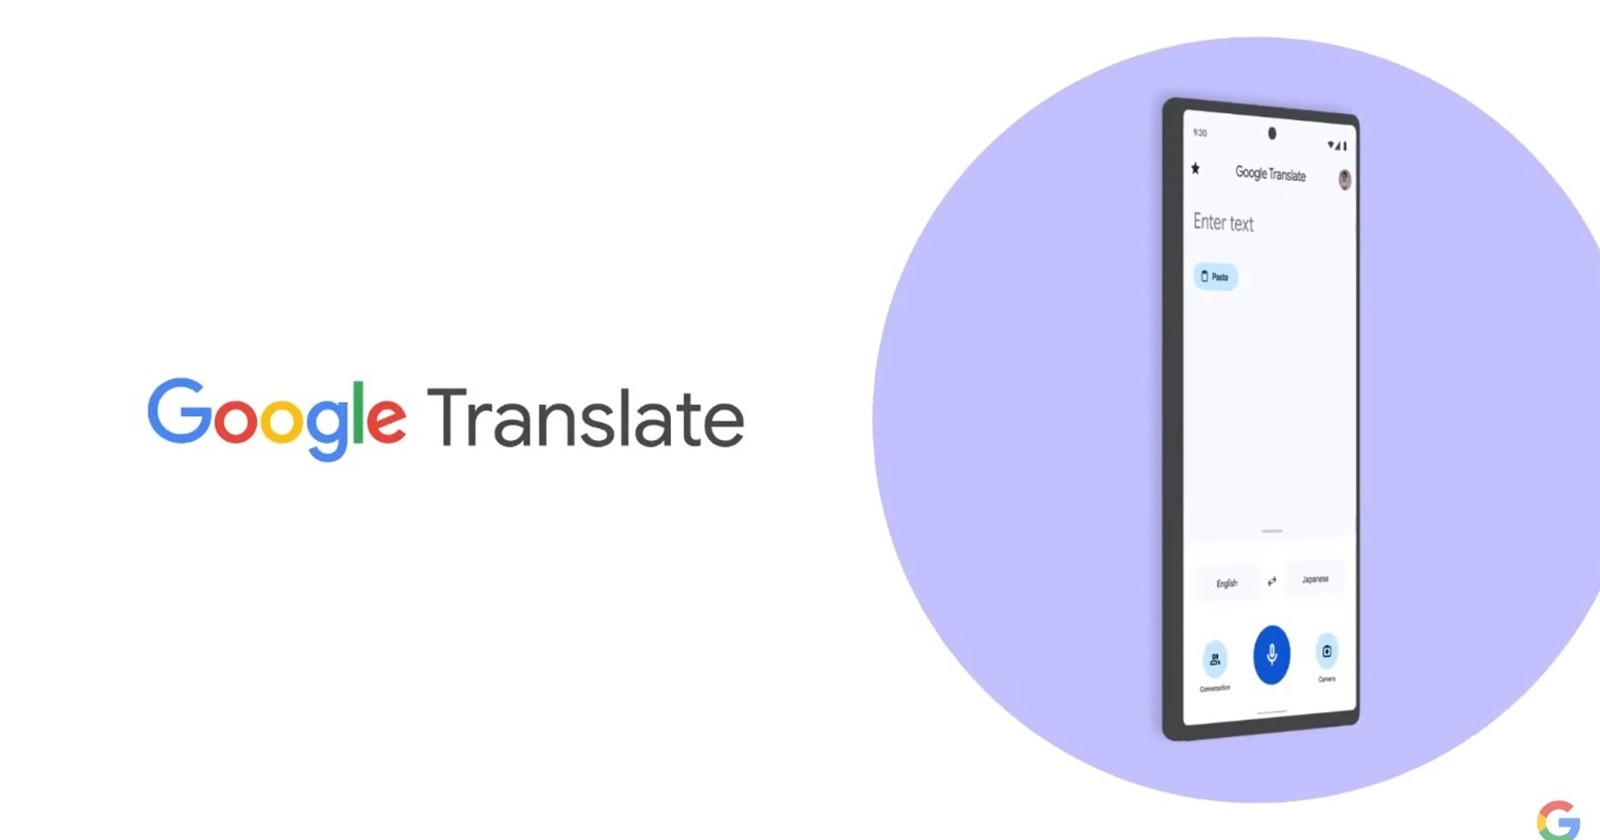 Latest Google Translate update brings Auto language detection and other features to Pixel devices